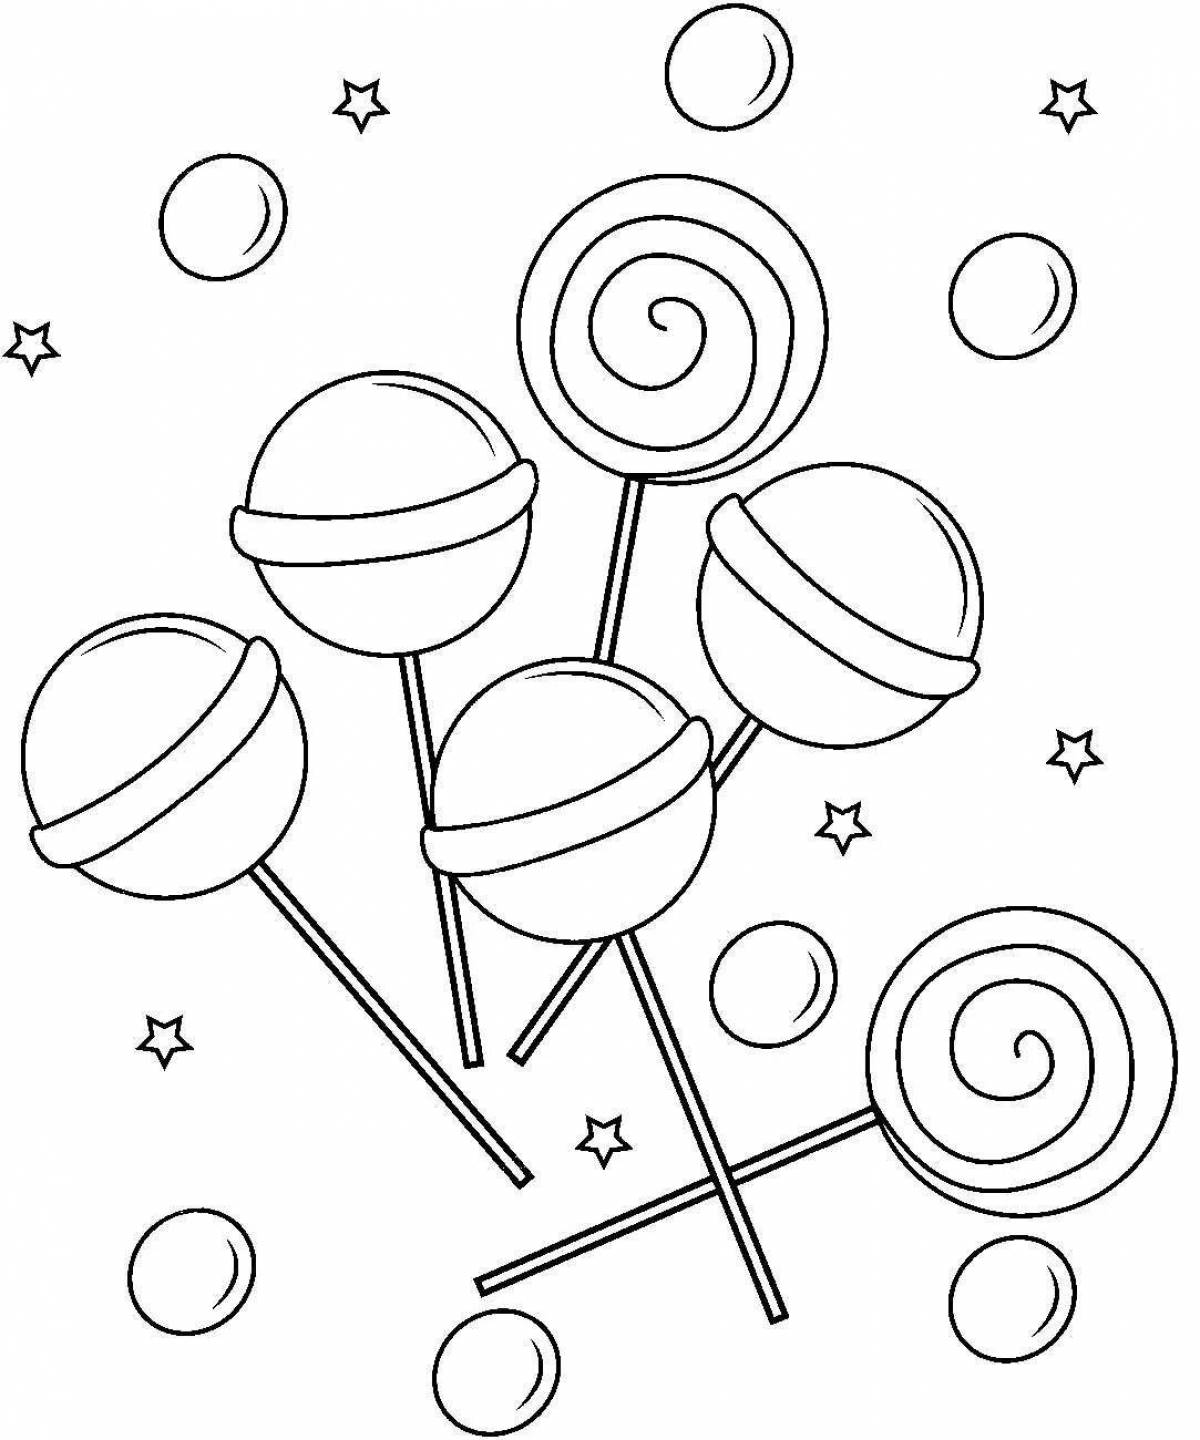 Color-frenzy cake pops coloring page